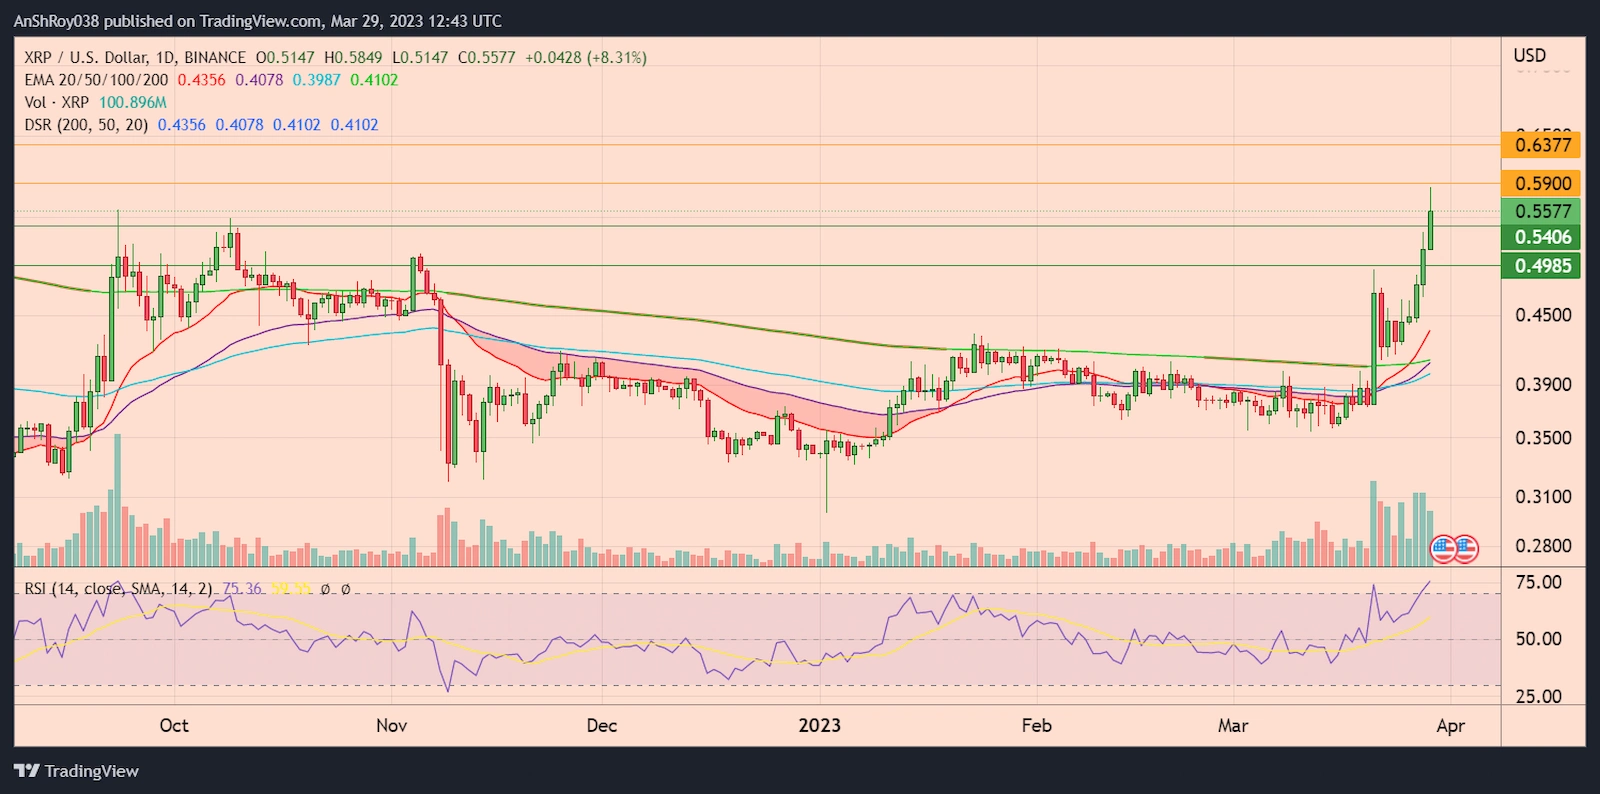 XRPUSD daily chart with RSI.